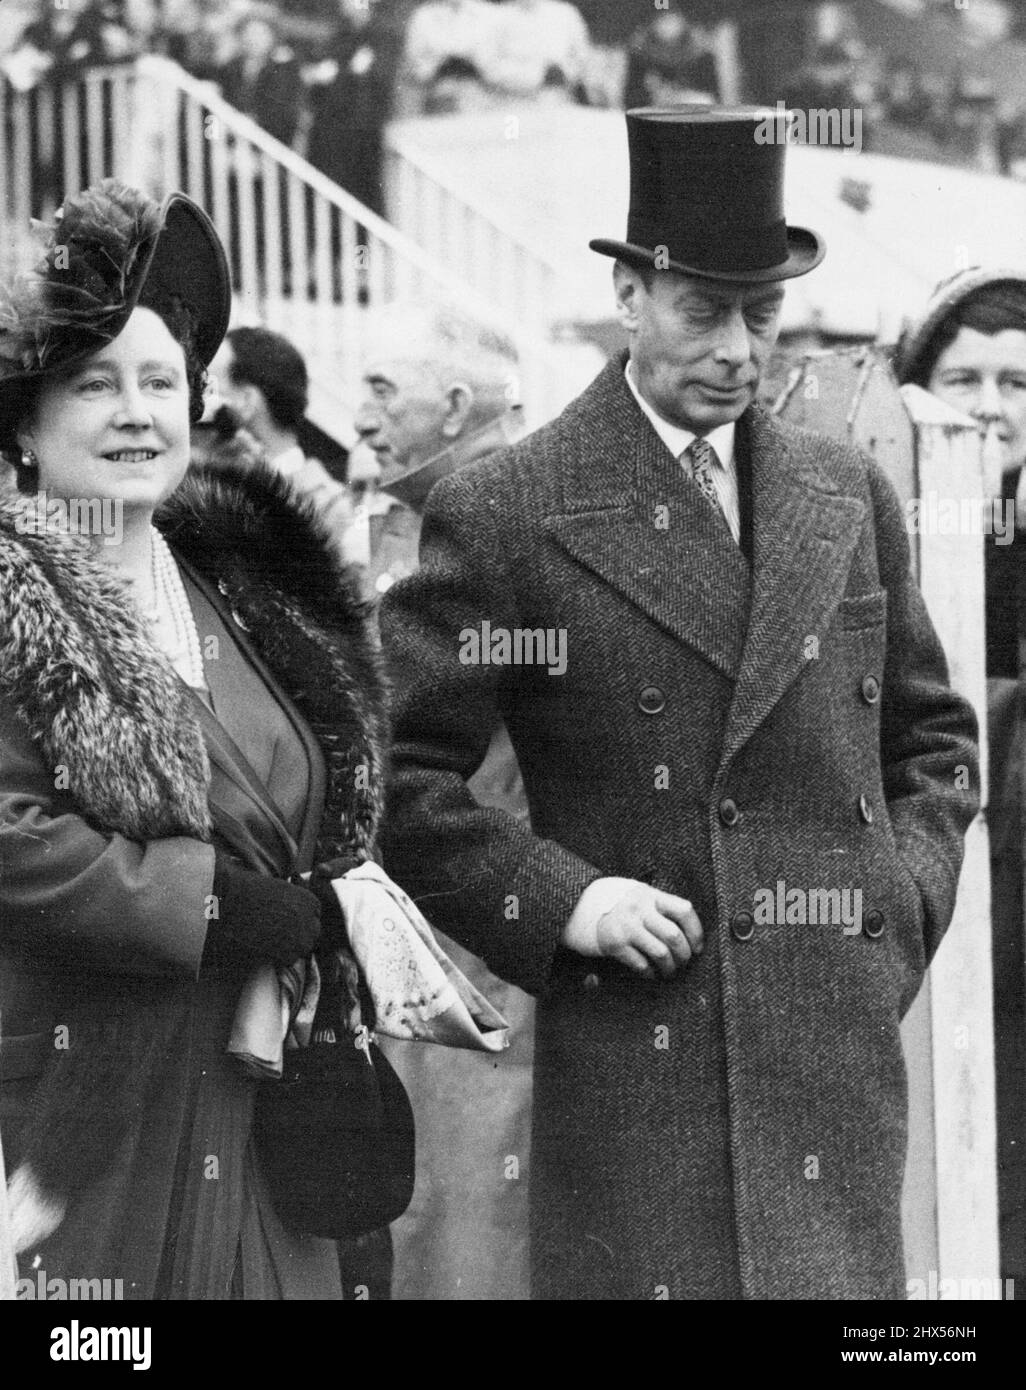 The King's Hand is Bandaged - The King and Queen, pictured here as they attended the Oaks stakes, run at Epsom, Surrey, today (Thursday). The King's right hand is bandaged. May 25, 1950. (Photo by Reuterphoto). Stock Photo